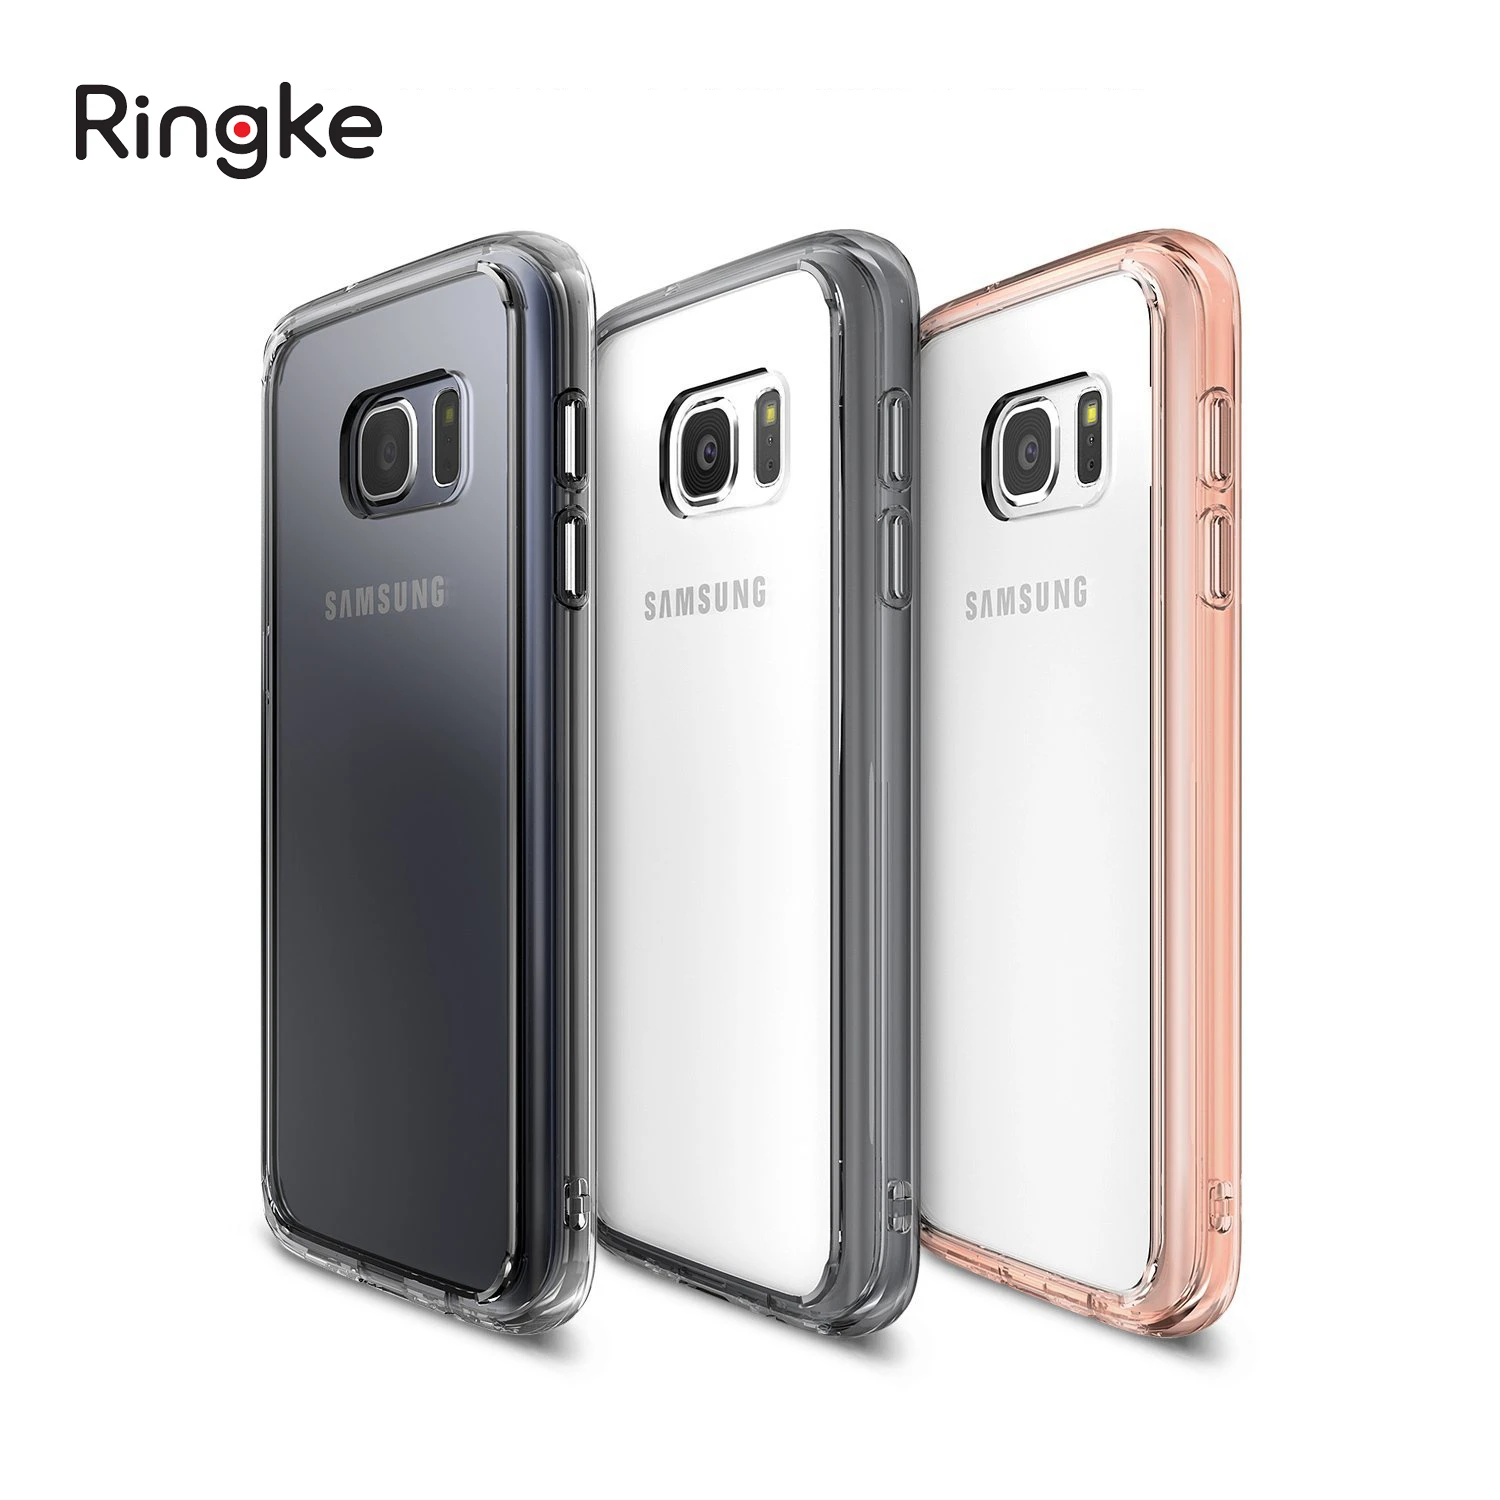 Uplifted hawk Ship shape Ringke Fusion Case For Galaxy S7 Capa with Hard Clear PC Back Panel Soft  TPU Frame Protection Hybrid Cover for Samsung Galaxy S7|case for galaxy s7|case  for galaxycase me - AliExpress